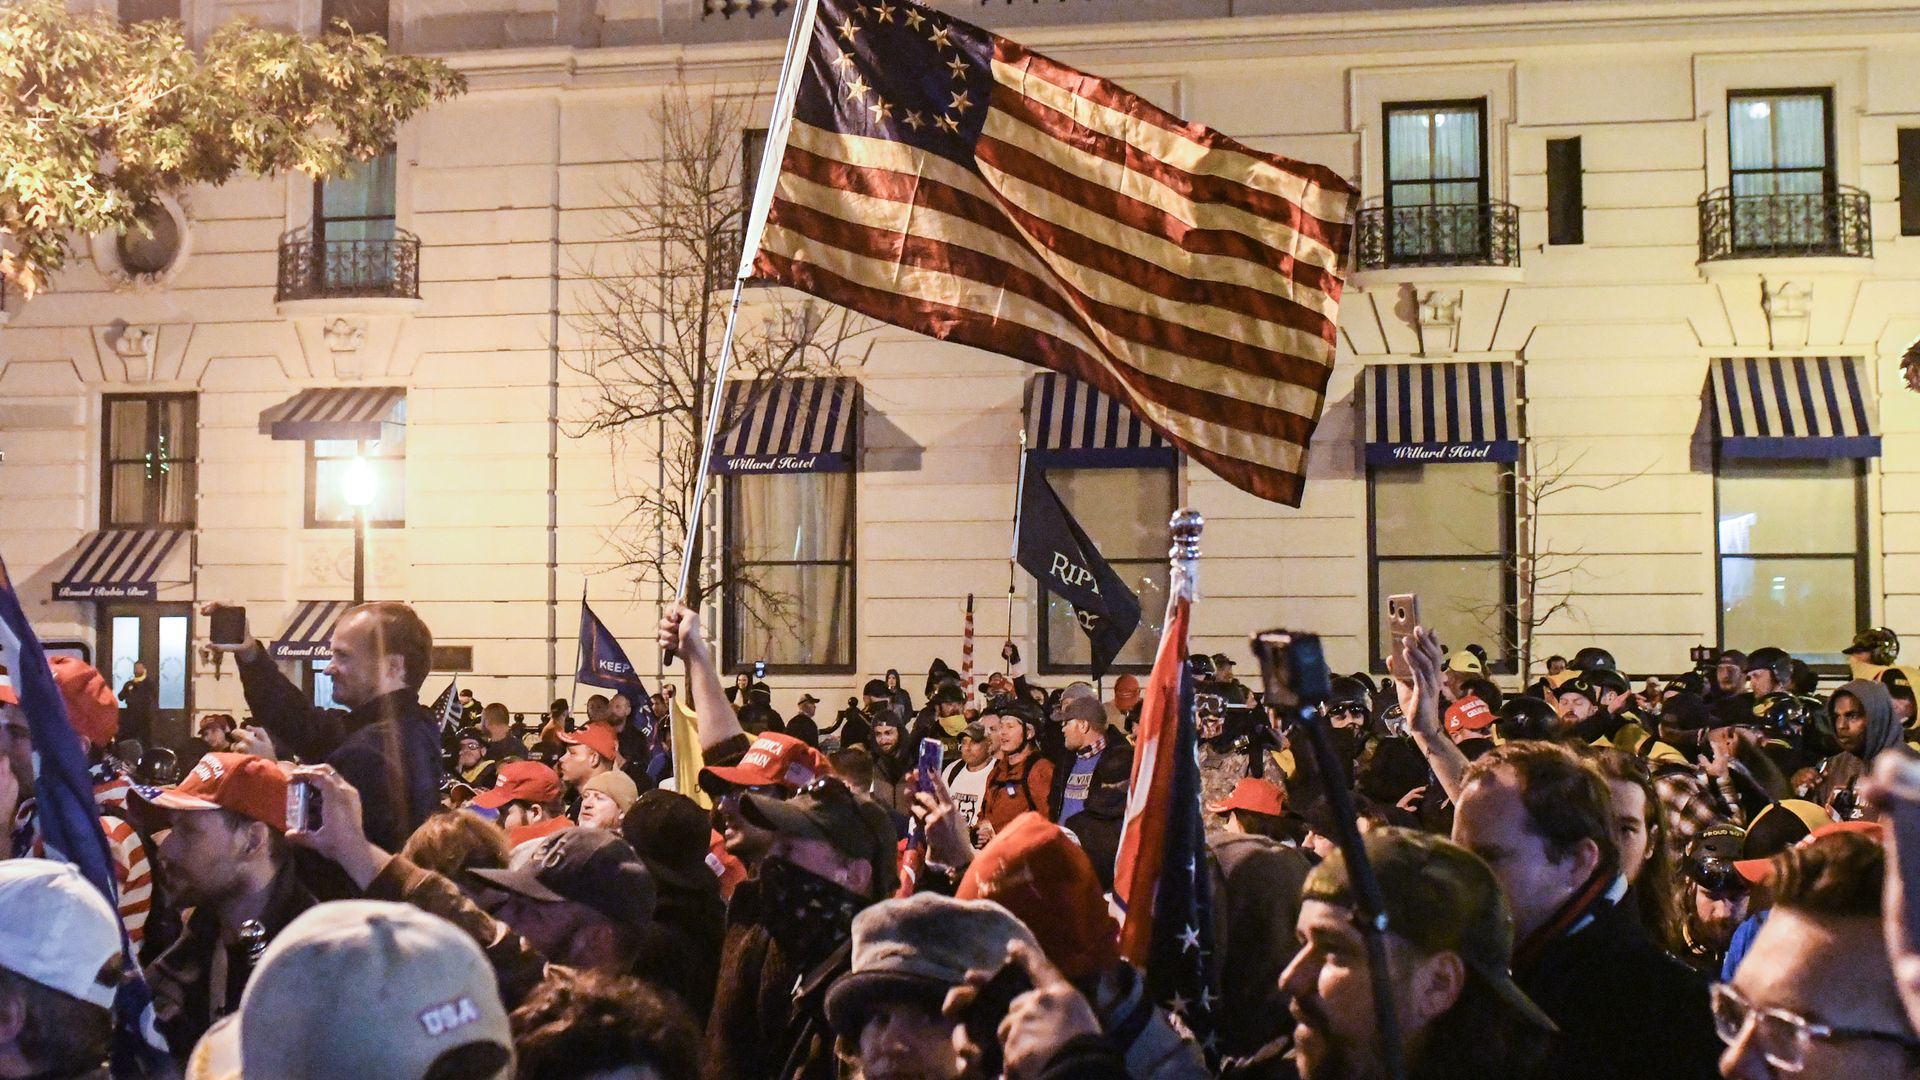  Supporters of President Trump wave a flag during a protest on December 12, 2020 in Washington, DC.